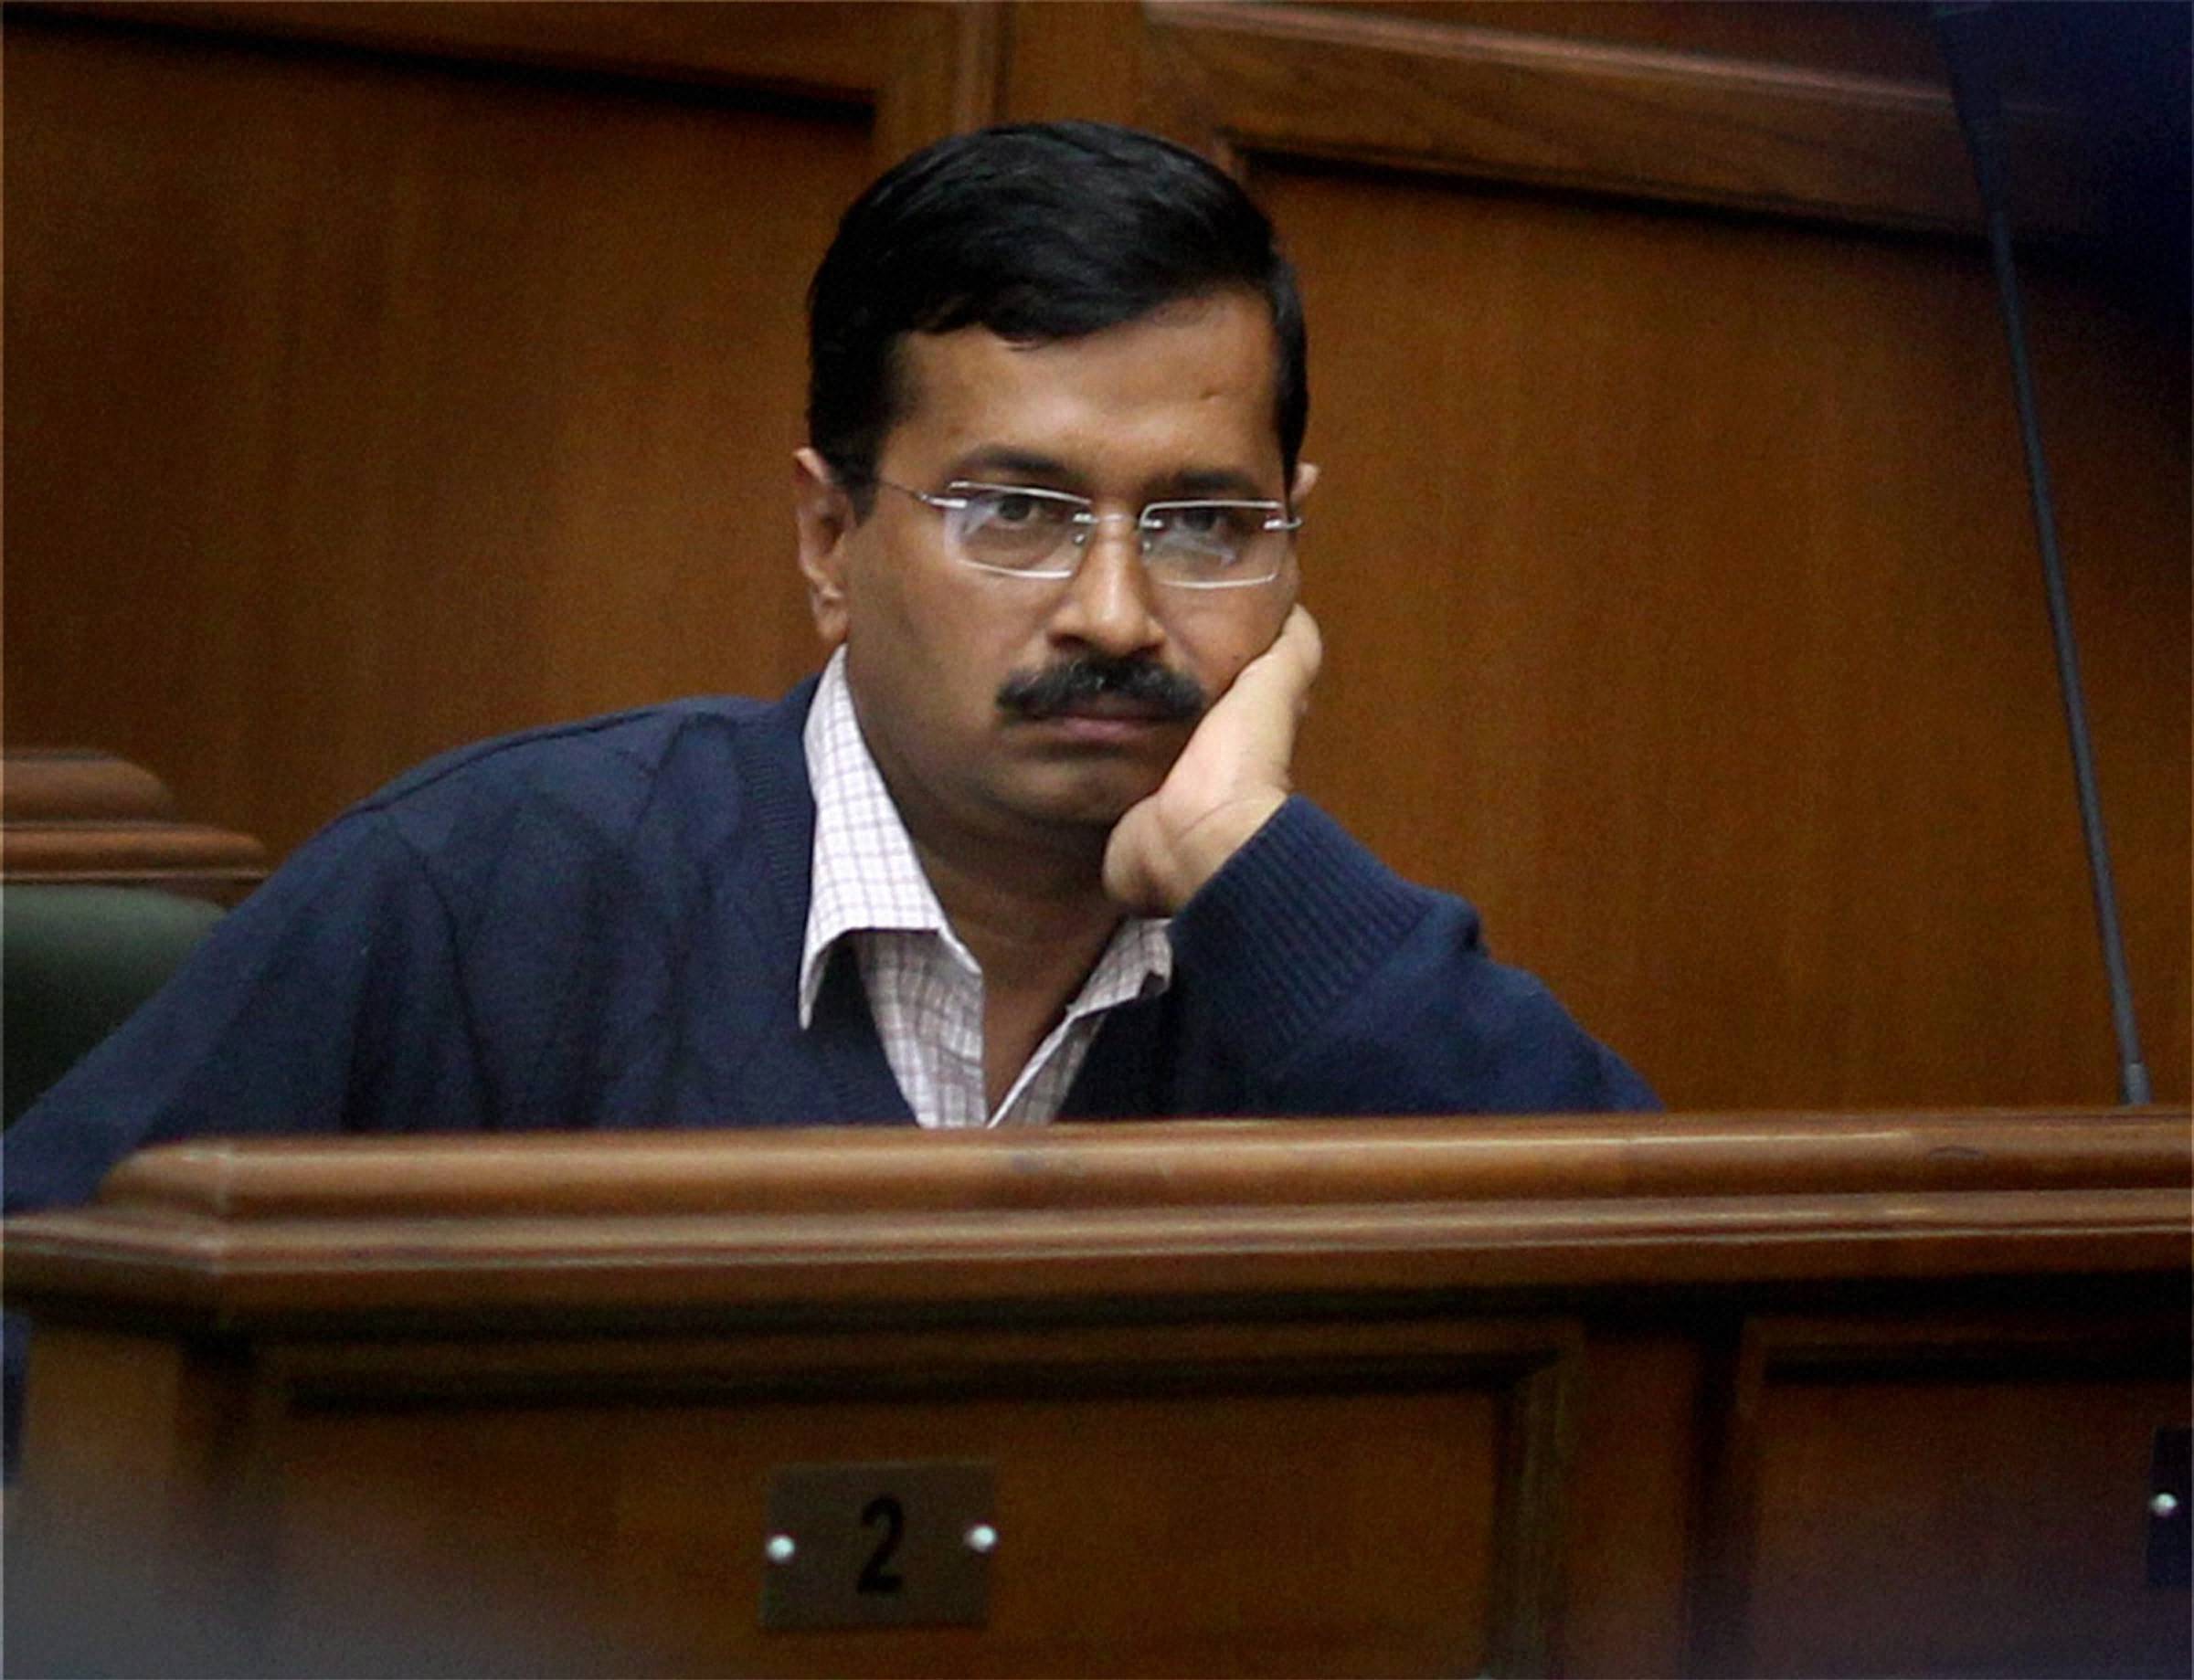 New Delhi : Delhi Chief Minister Arvind Kejriwal at a special session of the Delhi Assembly in New Delhi on Friday. PTI Photo by Atul Yadav(PTI2_14_2014_000177A)